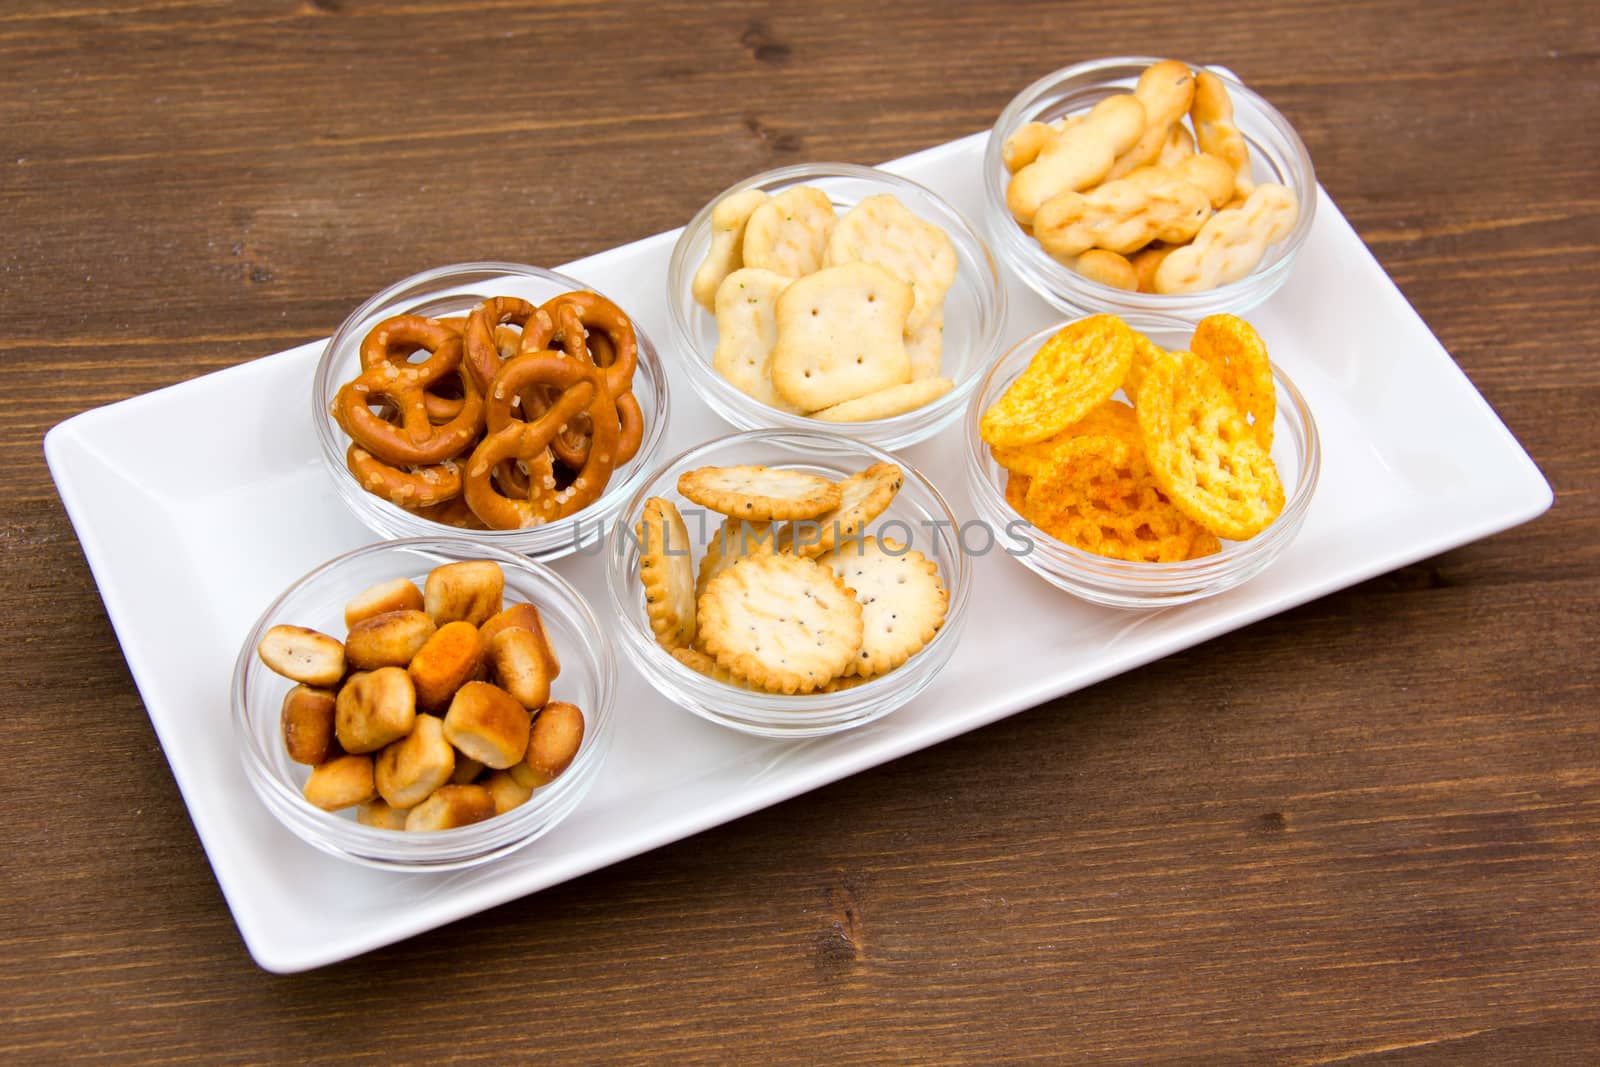 Bowls of pretzels on tray by spafra